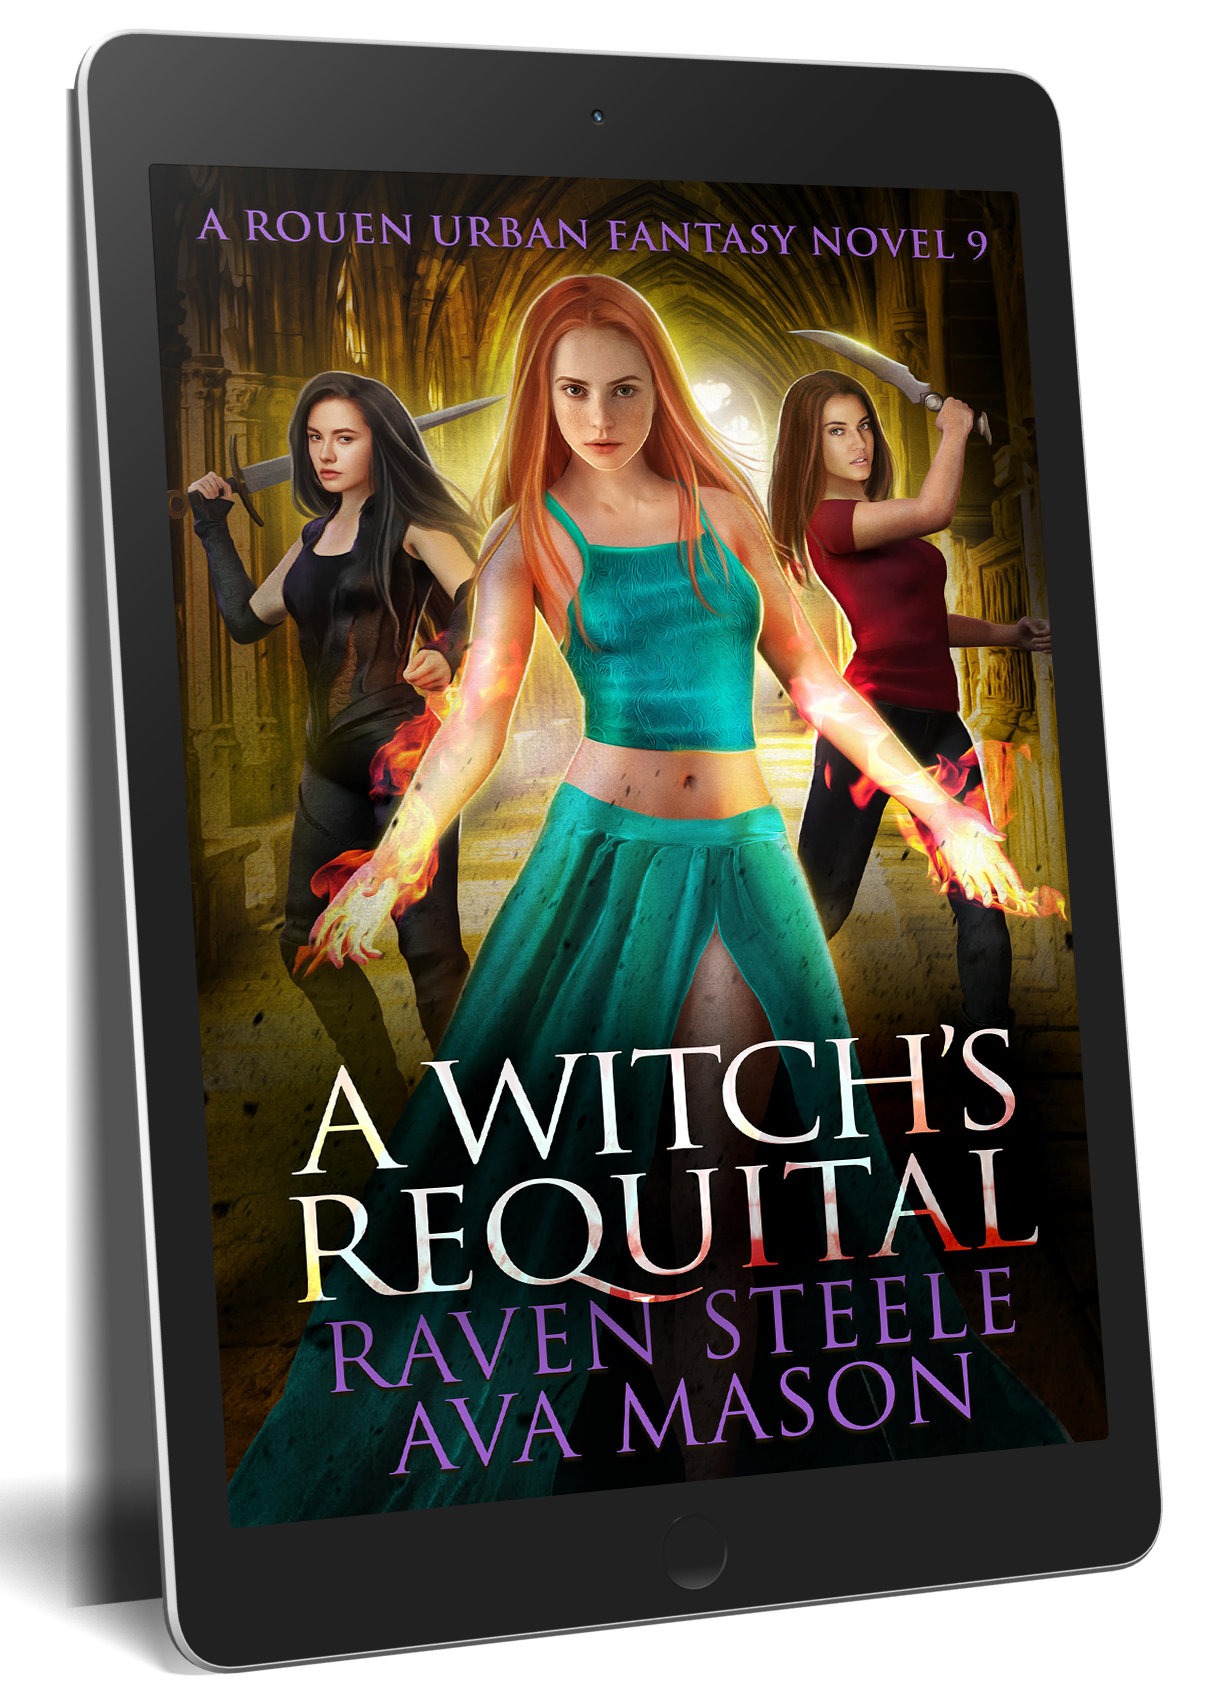 A Witch's Requital: A Gritty Urban Fantasy Novel (Rouen Chronicles Book 9)